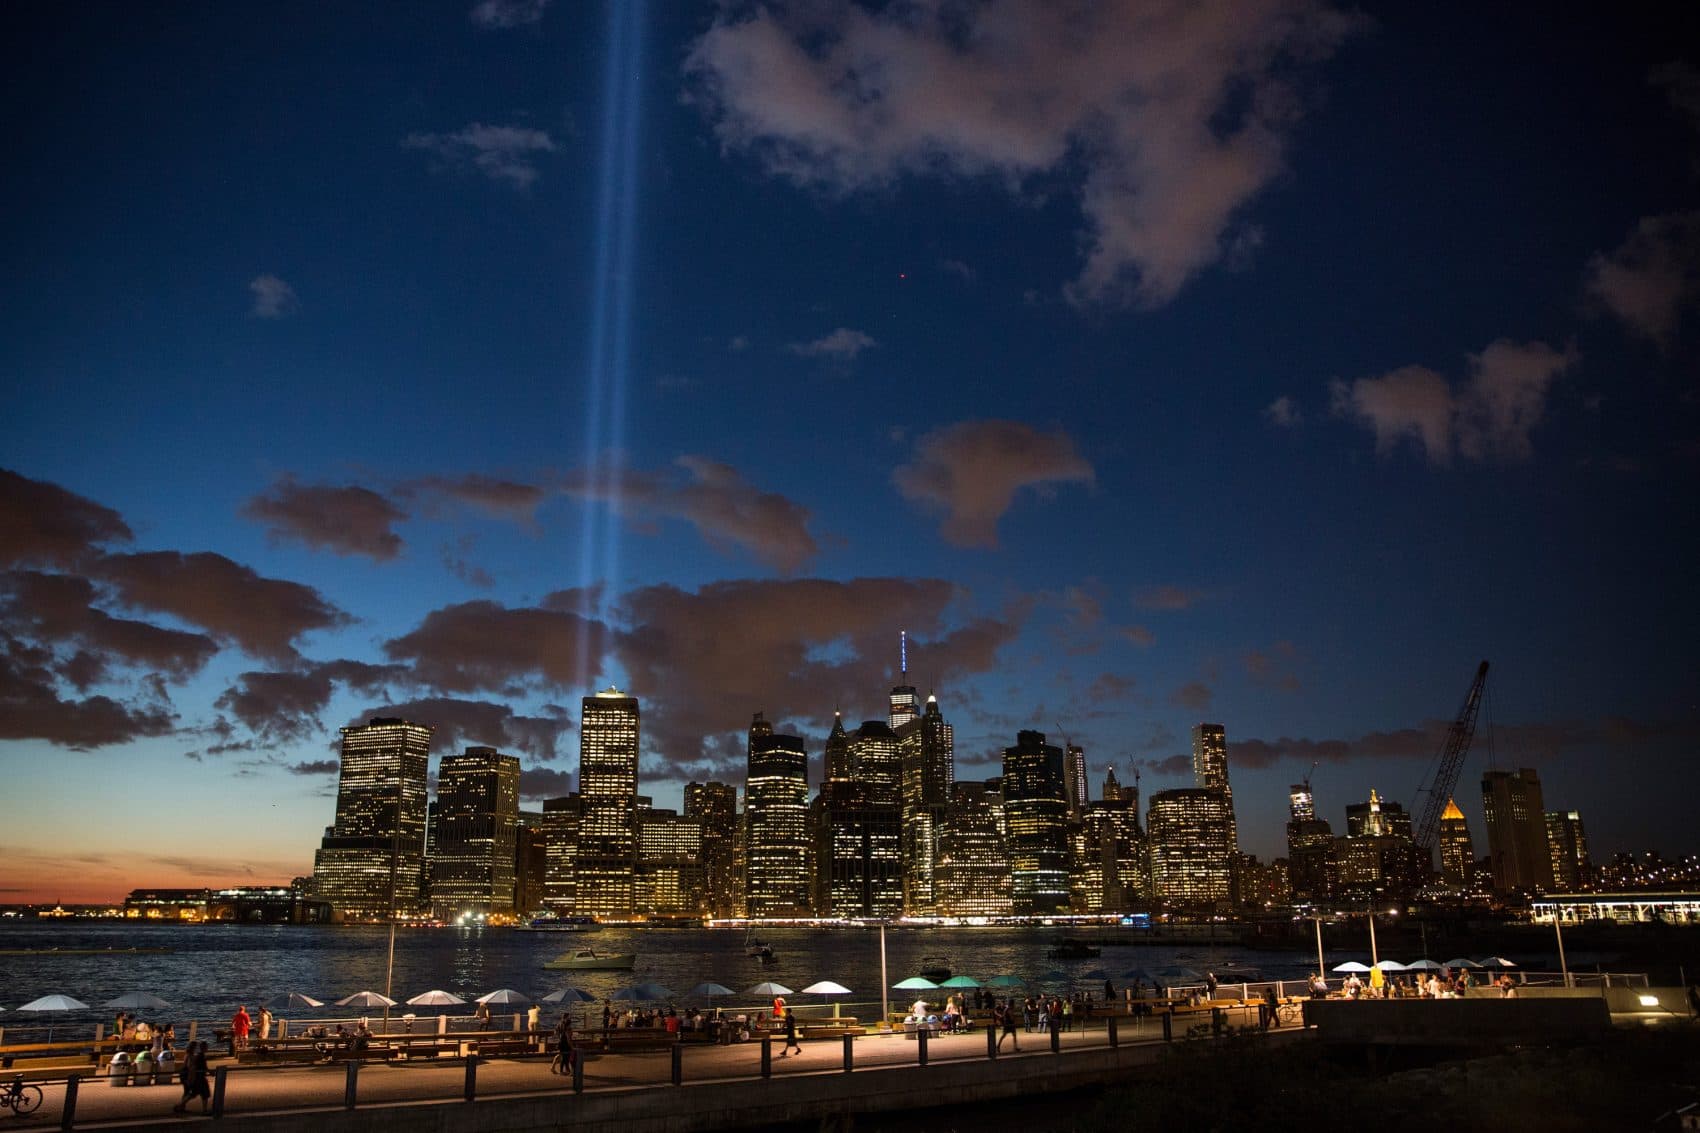 The September 11 Tribute in Light rises from the New York City skyline as seen from the Brooklyn Heights neighborhood of the Brooklyn Borough of New York City on Sept. 11, 2015. (Andrew Burton/Getty Images)